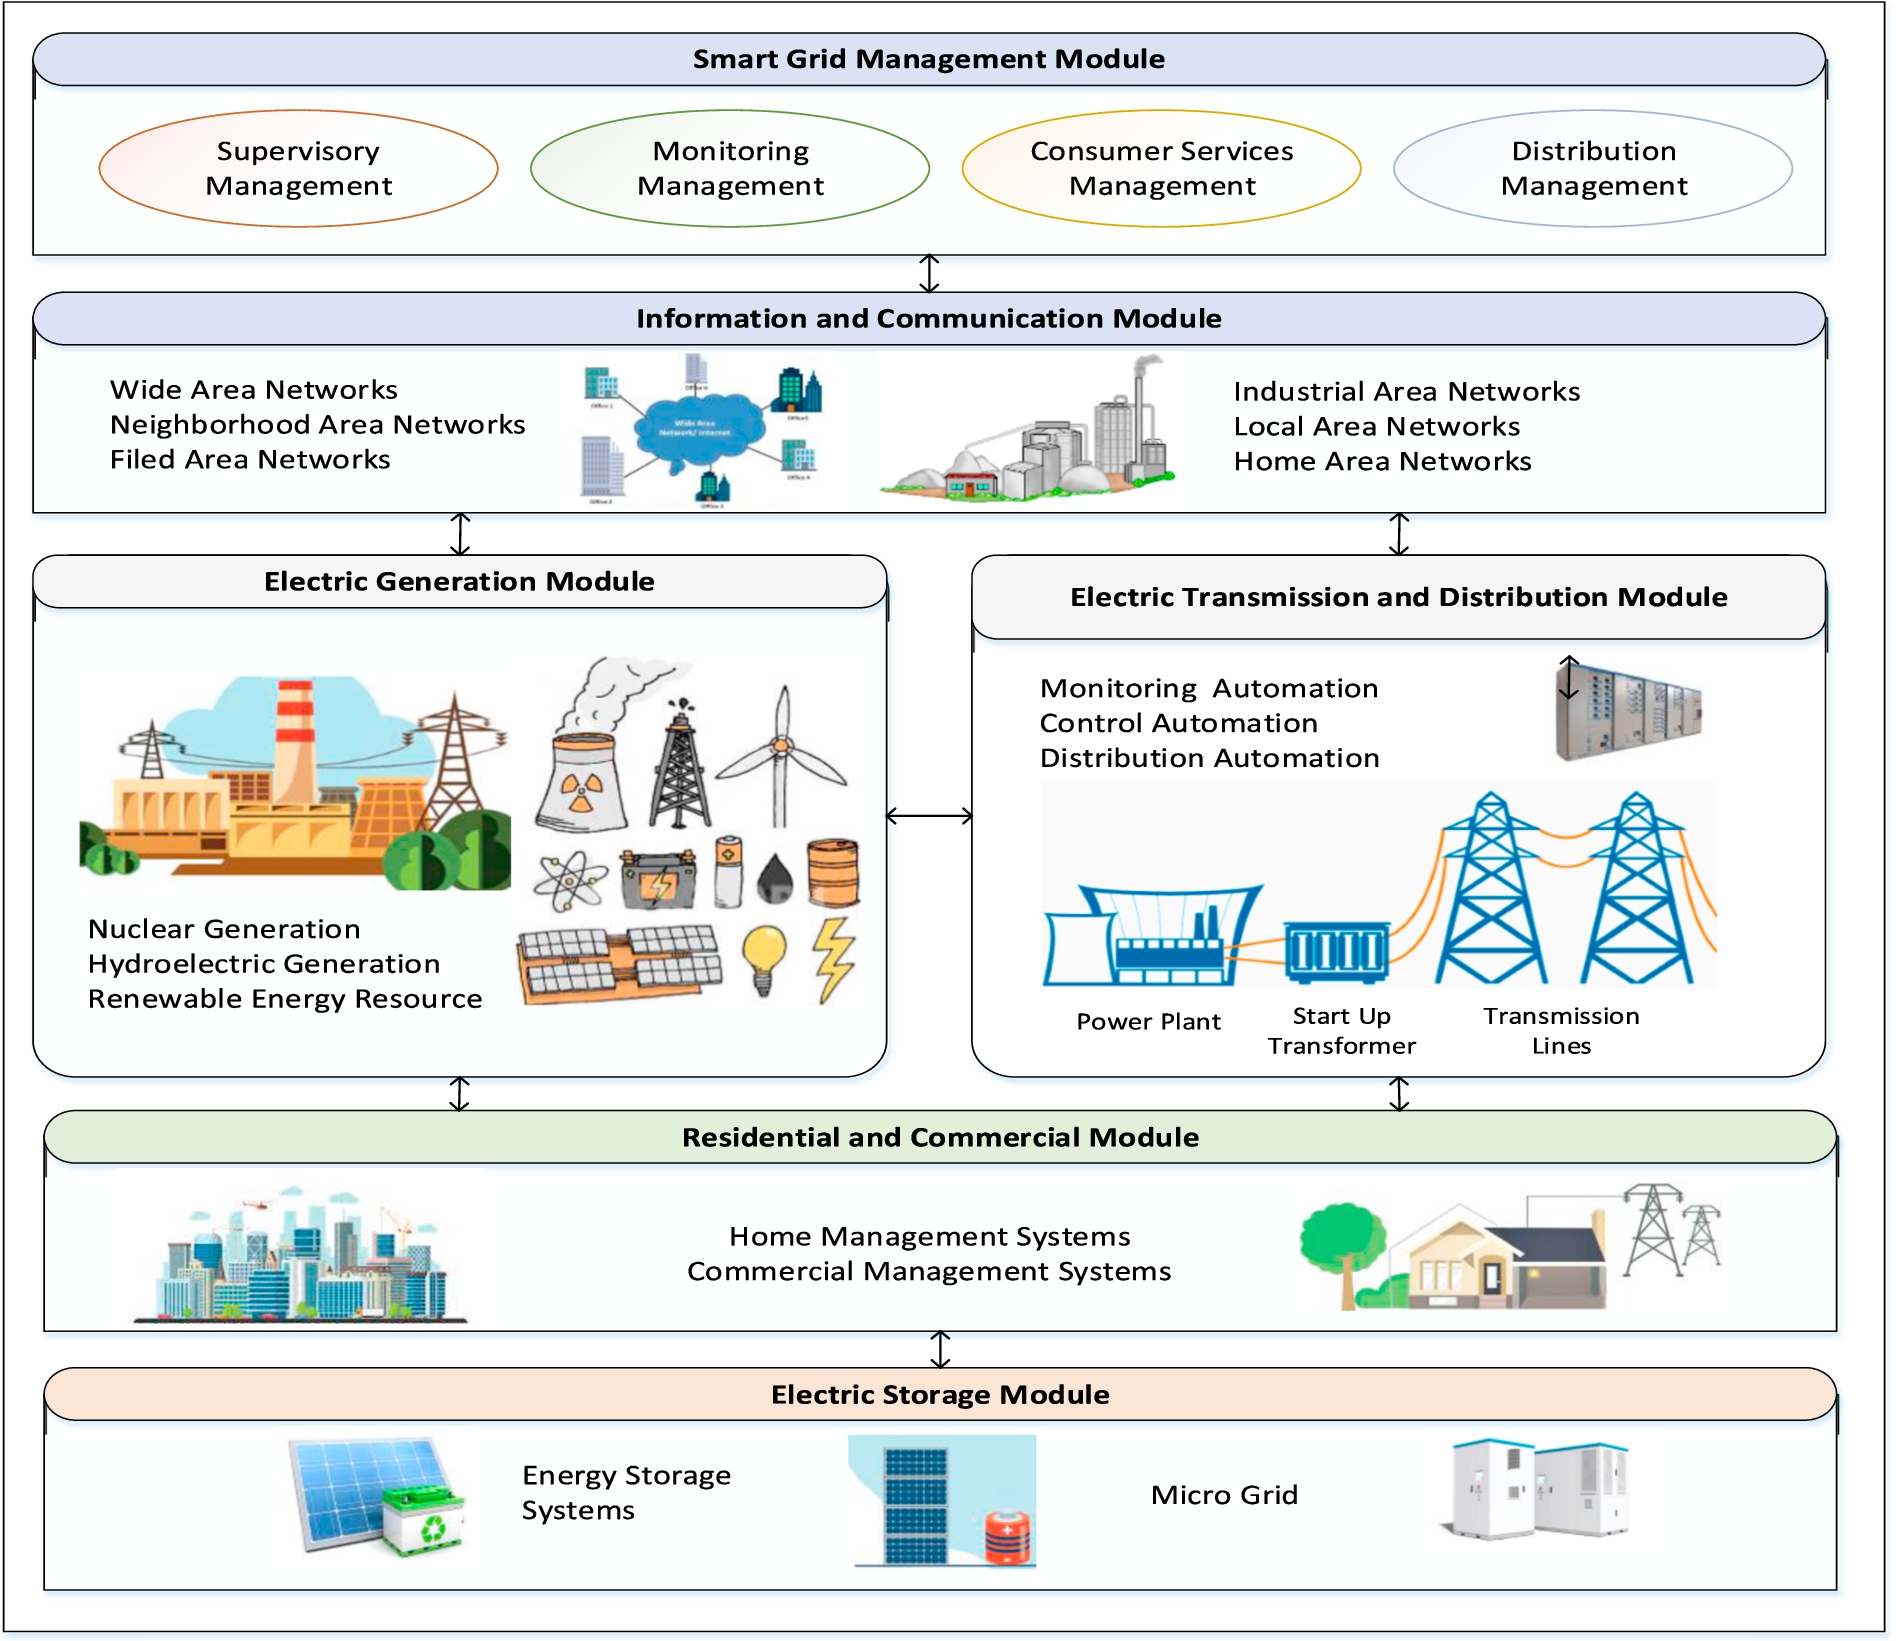 Smart grid architecture and its modules.